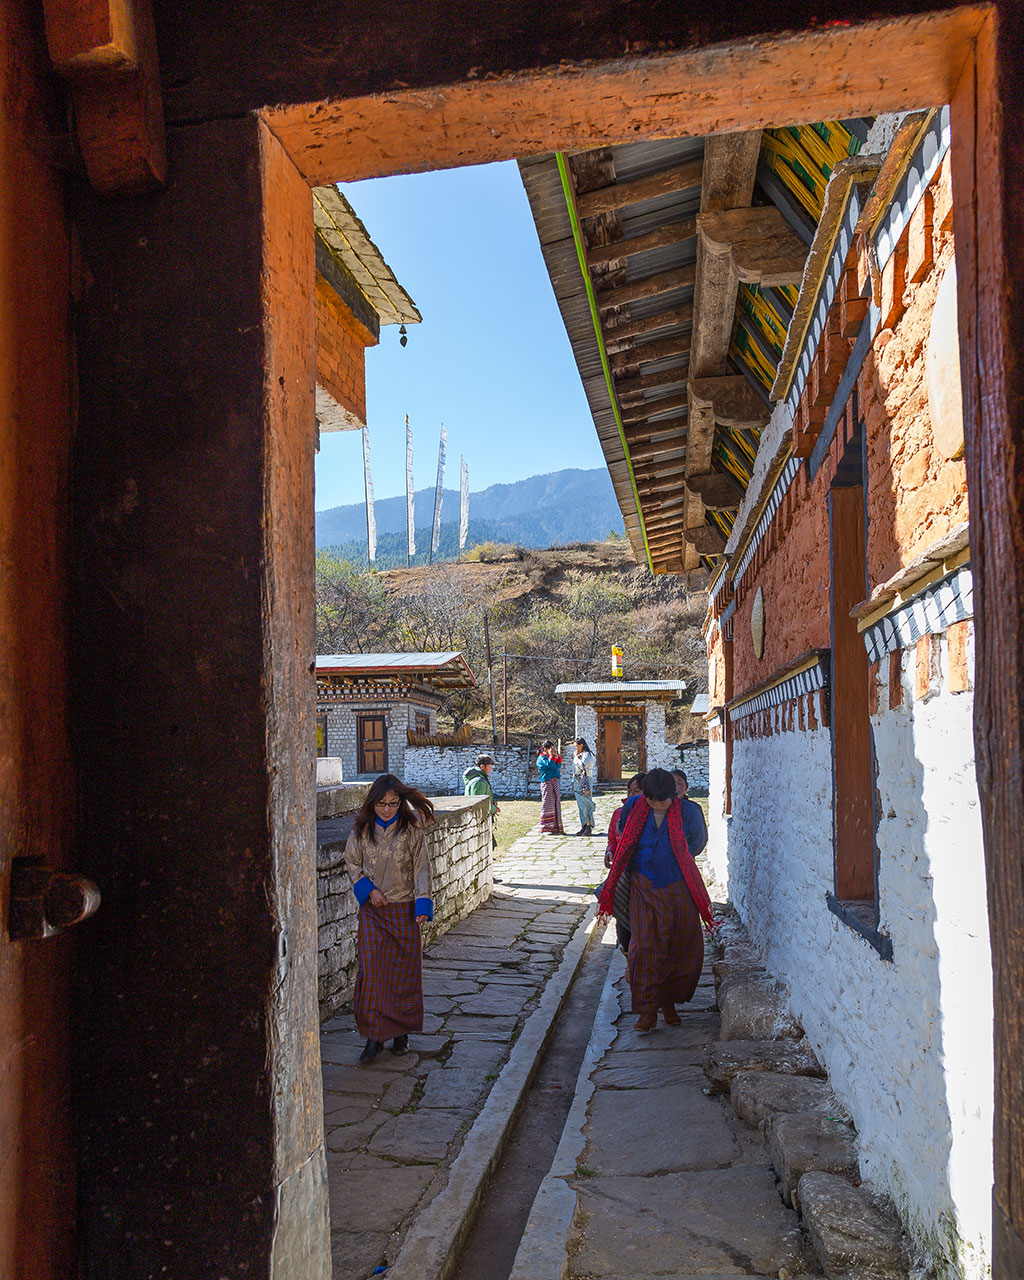 Circumambulating the path around the Jambay Lhakhang, prayer wheels and earthy textures showing the way.